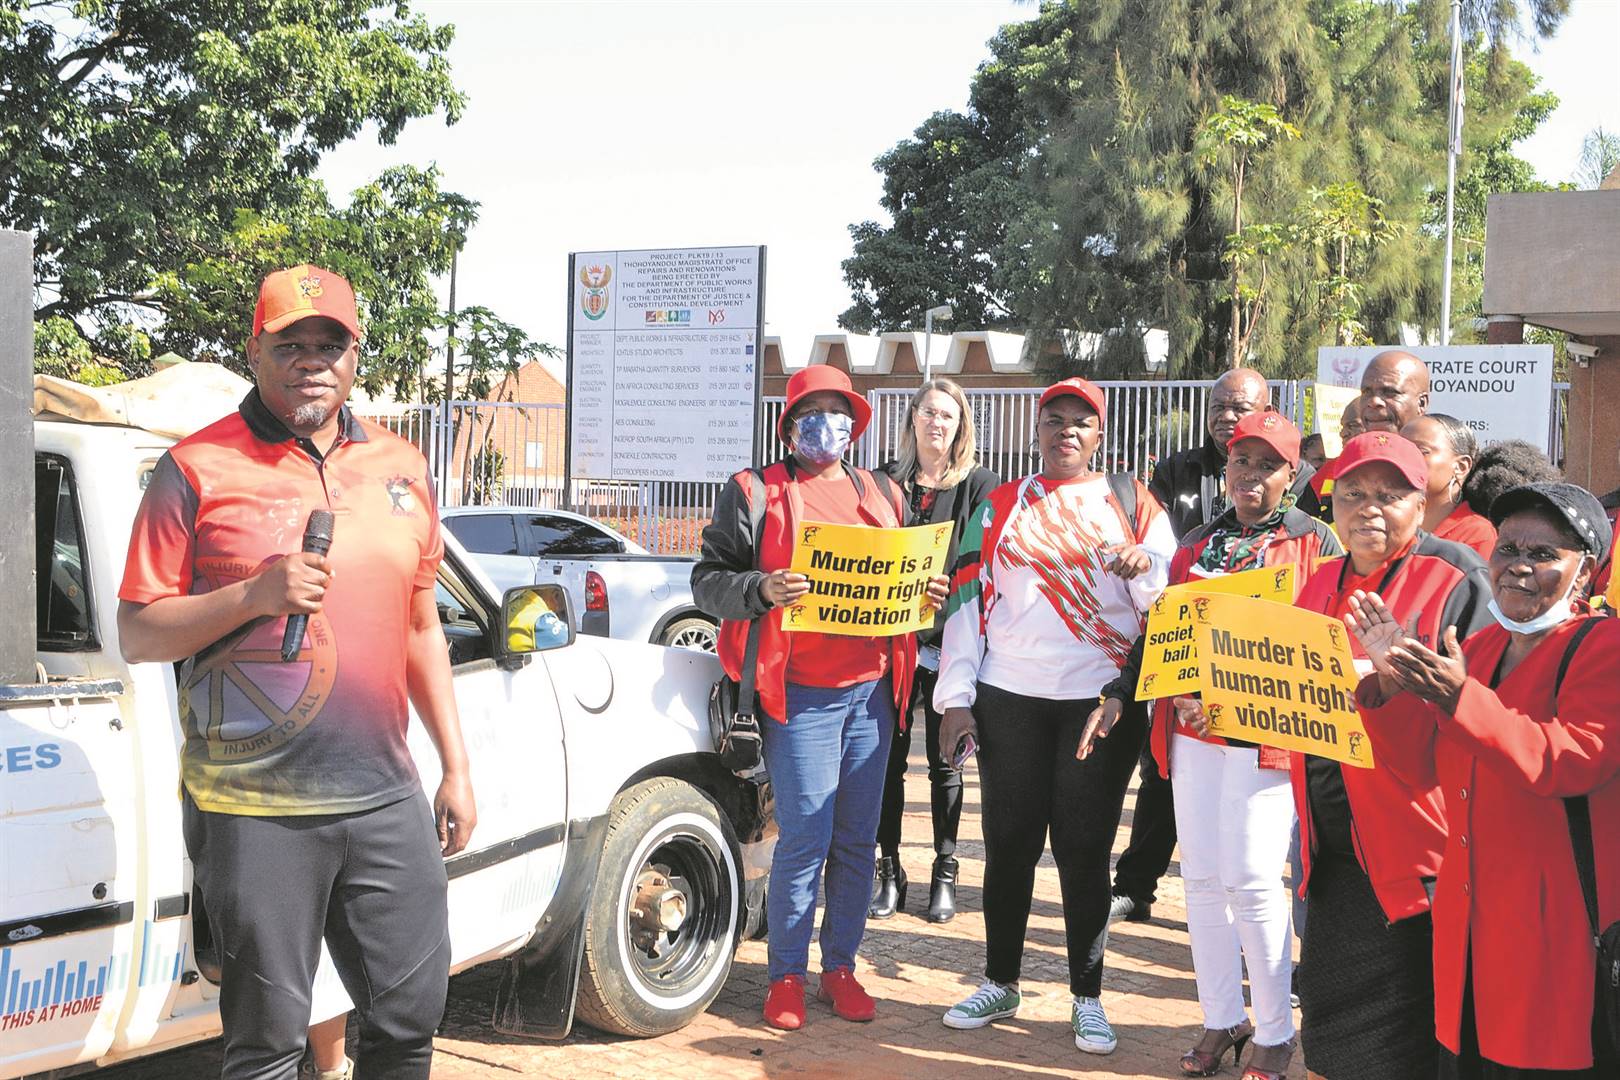 Cosatu’s provincial secretary Gerald Twala (left), union members and residents picket outside the court to support the families of the two Vhembe Samwu officials who were gunned down in separate incidents three years ago. Photo by Silas Nduvheni